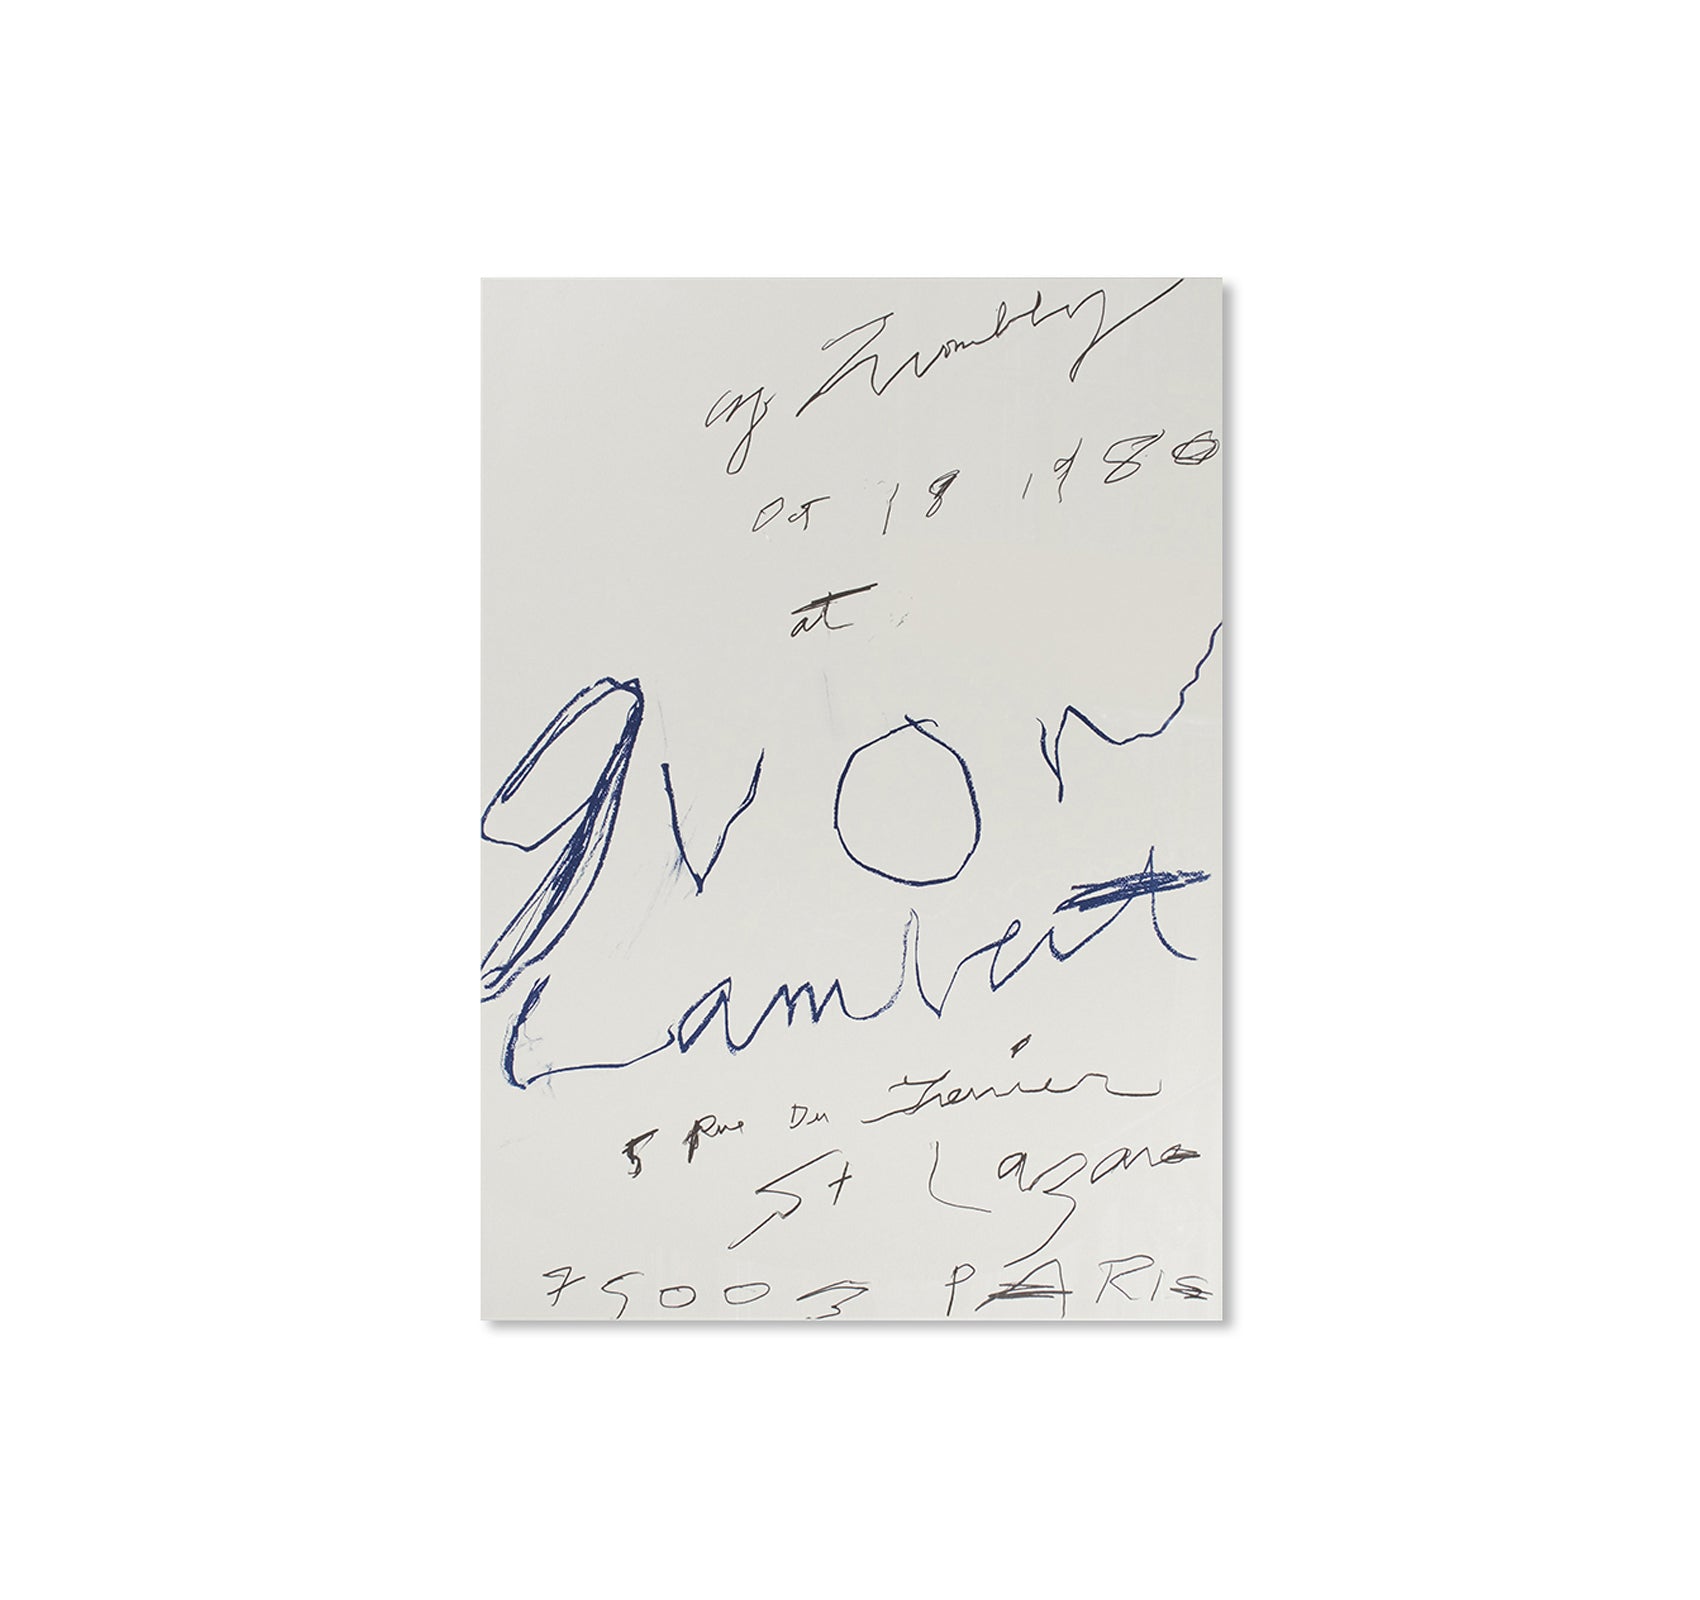 PRINT (1980) by Cy Twombly [REPRINTED EDITION]